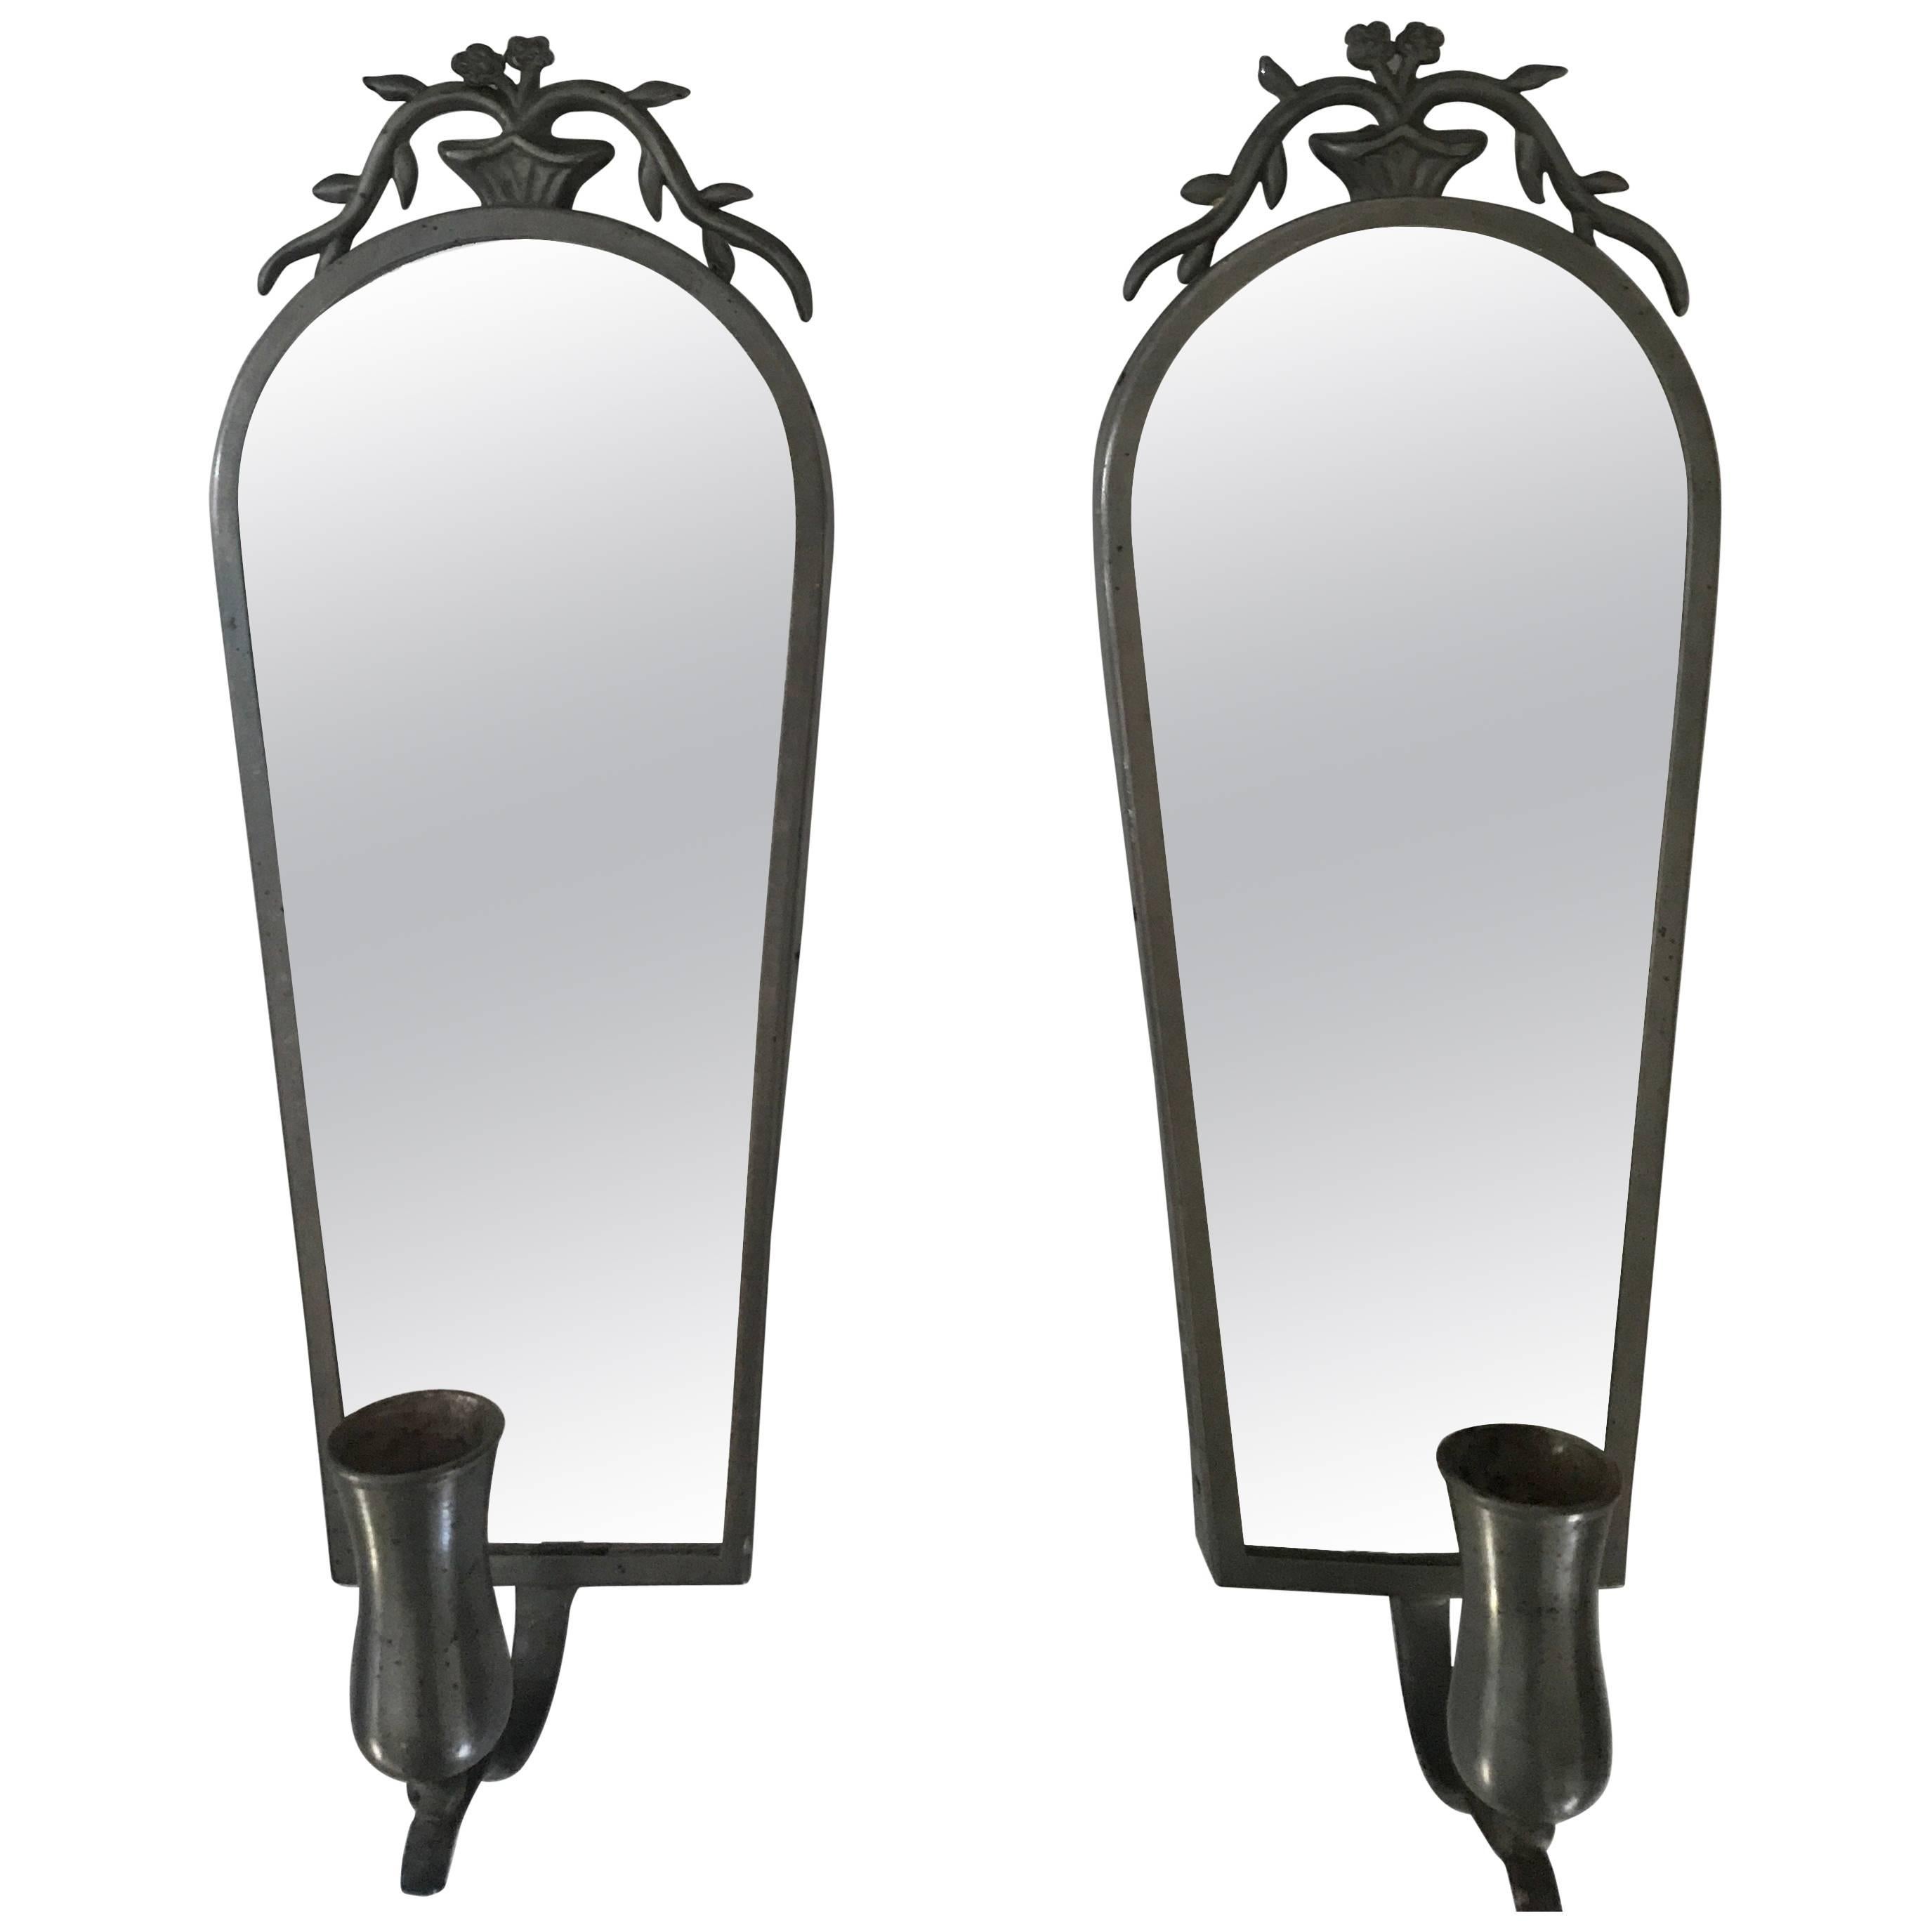 Pair of Swedish Grace Pewter Mirror Candle Sconces by Nils Fougsted Svenskt Tenn For Sale